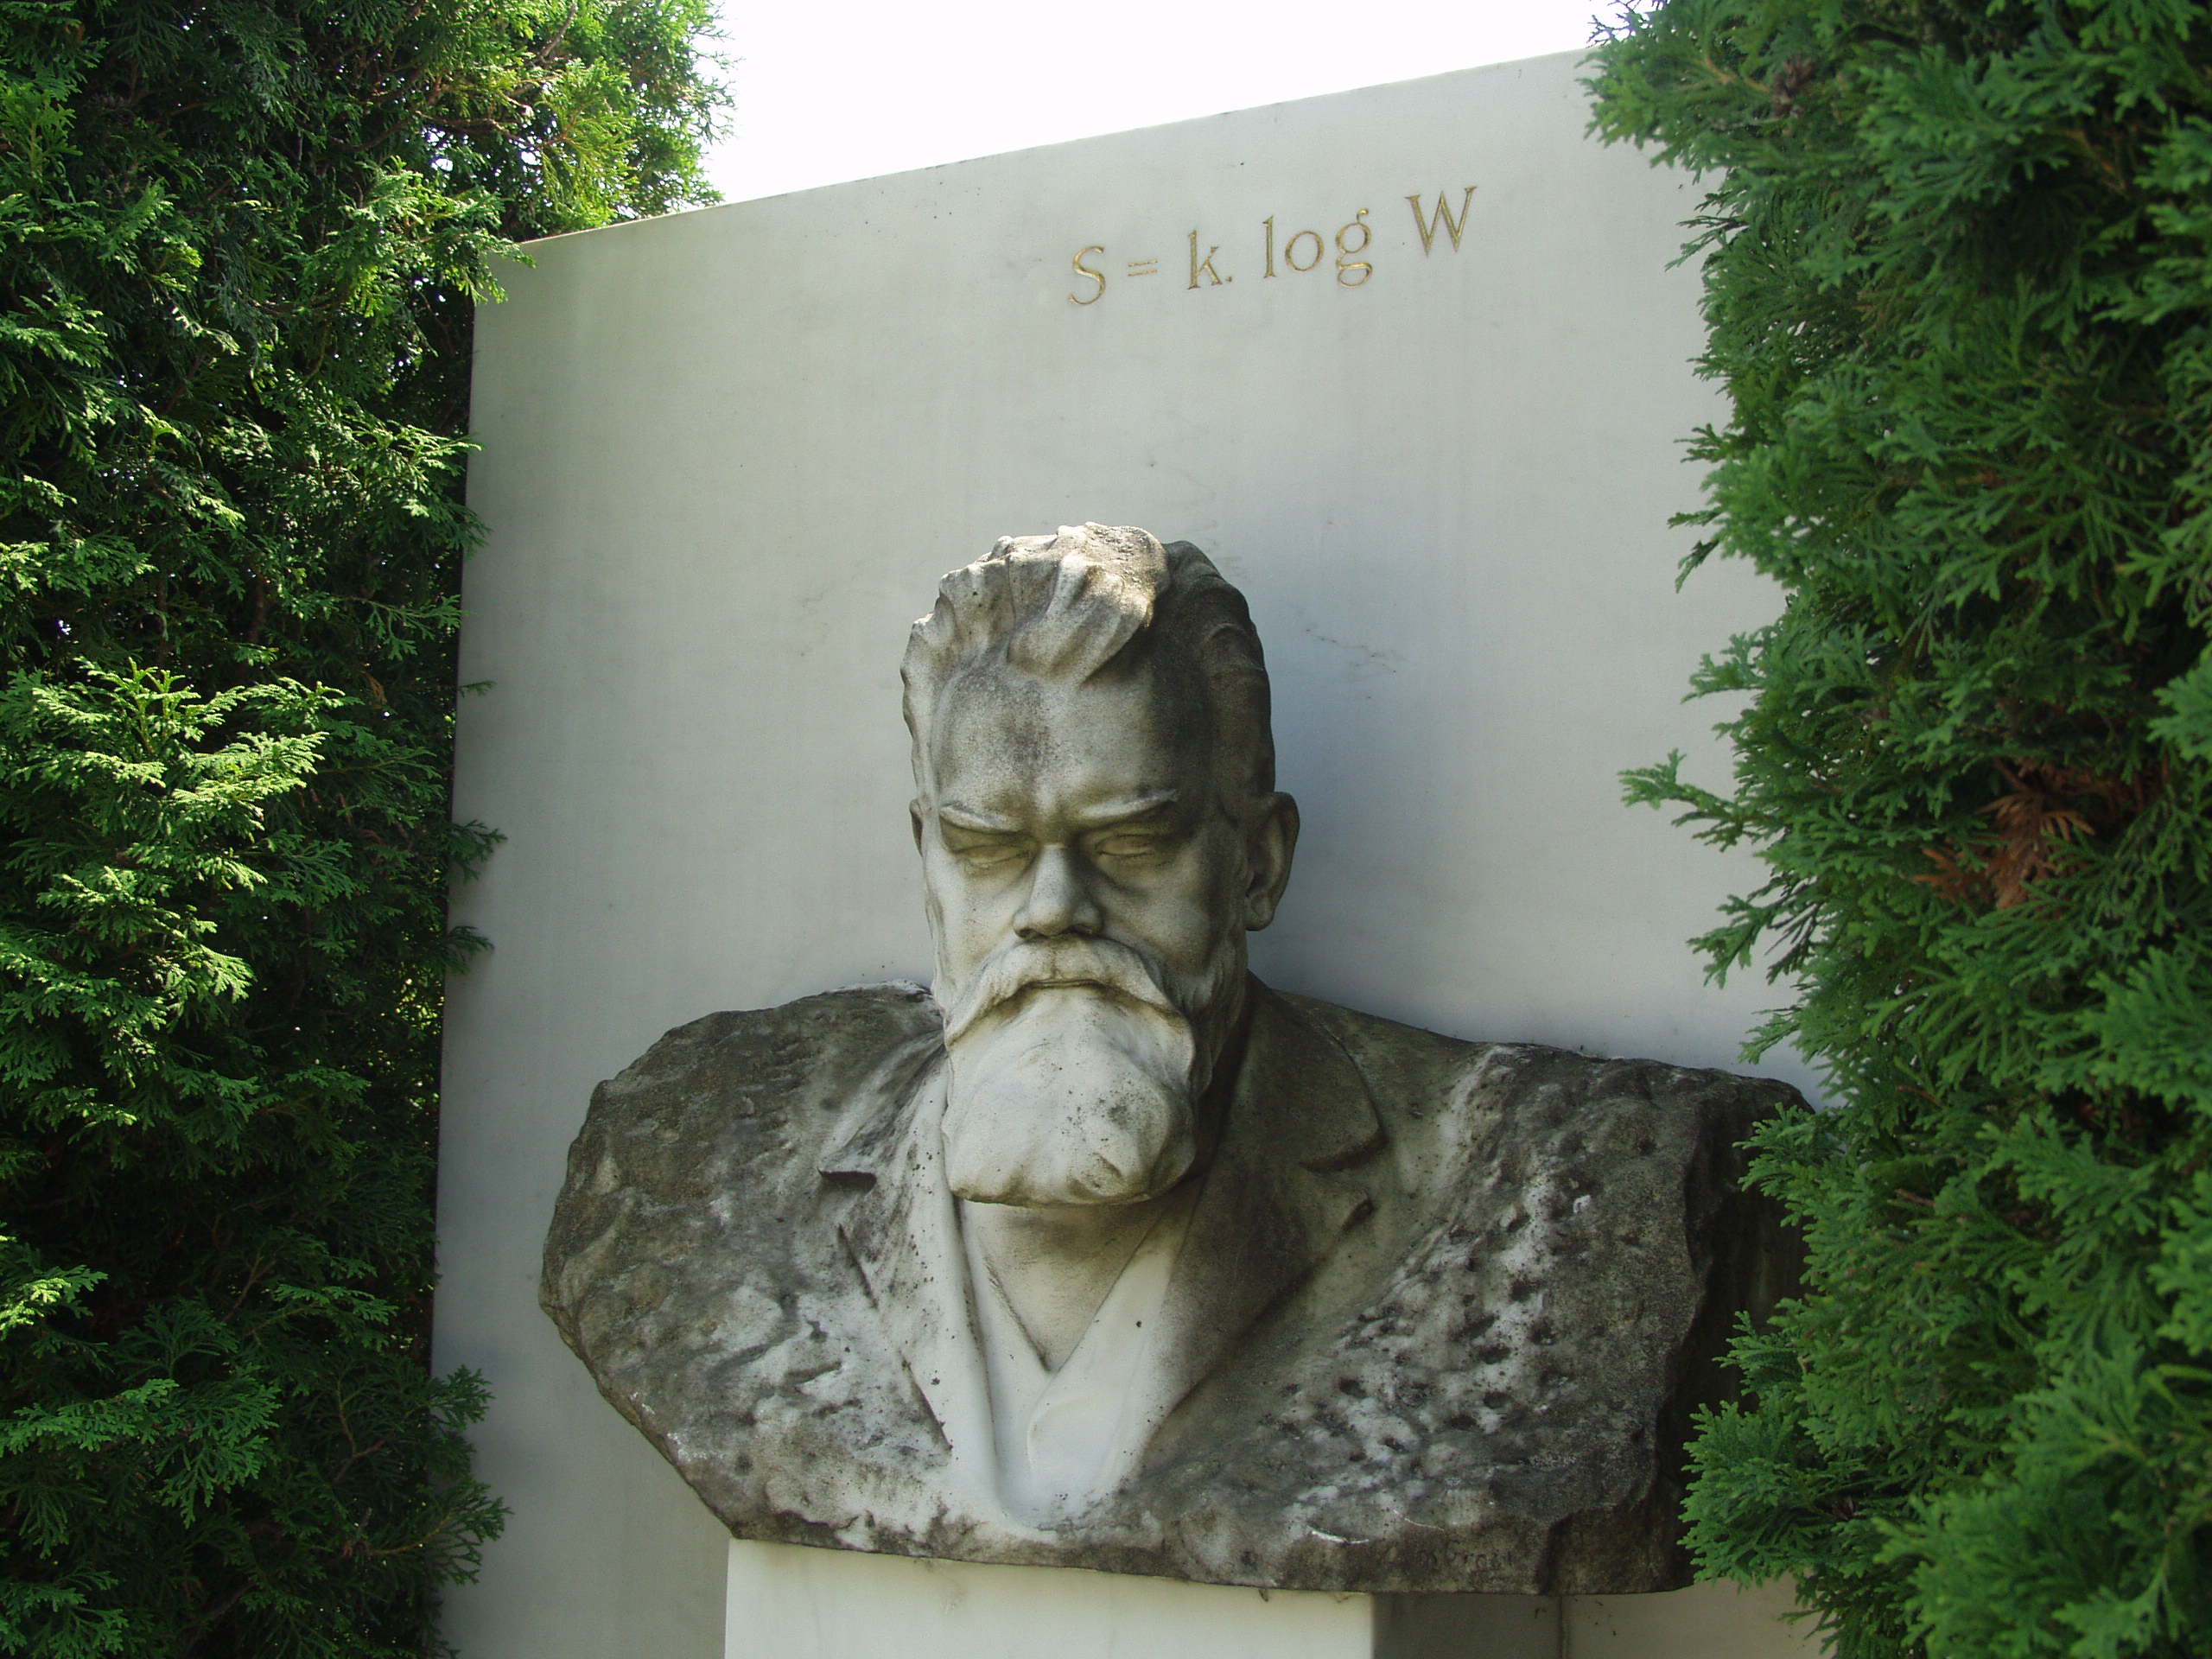 
Vienna, Austria.
Boltzmann's Tomb in the Zentralfriedhof (Central Cemetary).
The Tomb is in Gruppe 14 C Grab No 1 (group 14 grave number 1).
Photos by
Tom Schneider or of him by Gerd Muller.
2002 July 14.
This image: bust of Boltzmann.
(a href =
